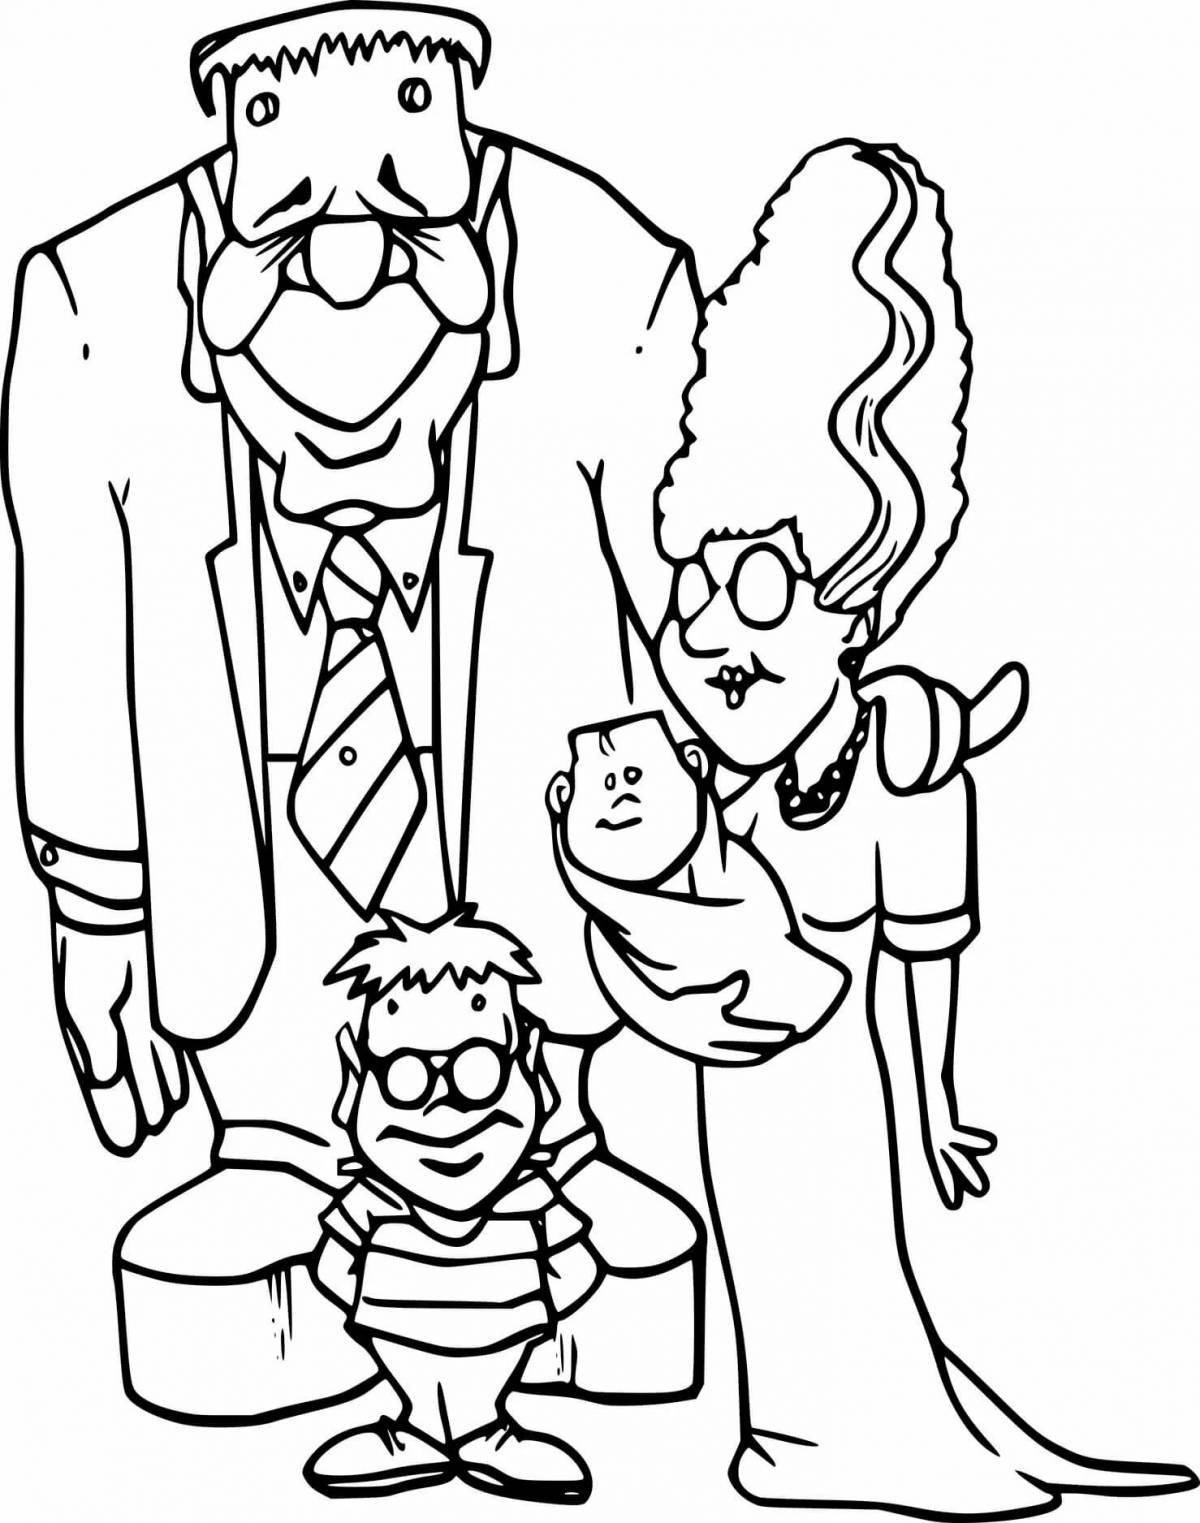 Animated addams family coloring book for kids